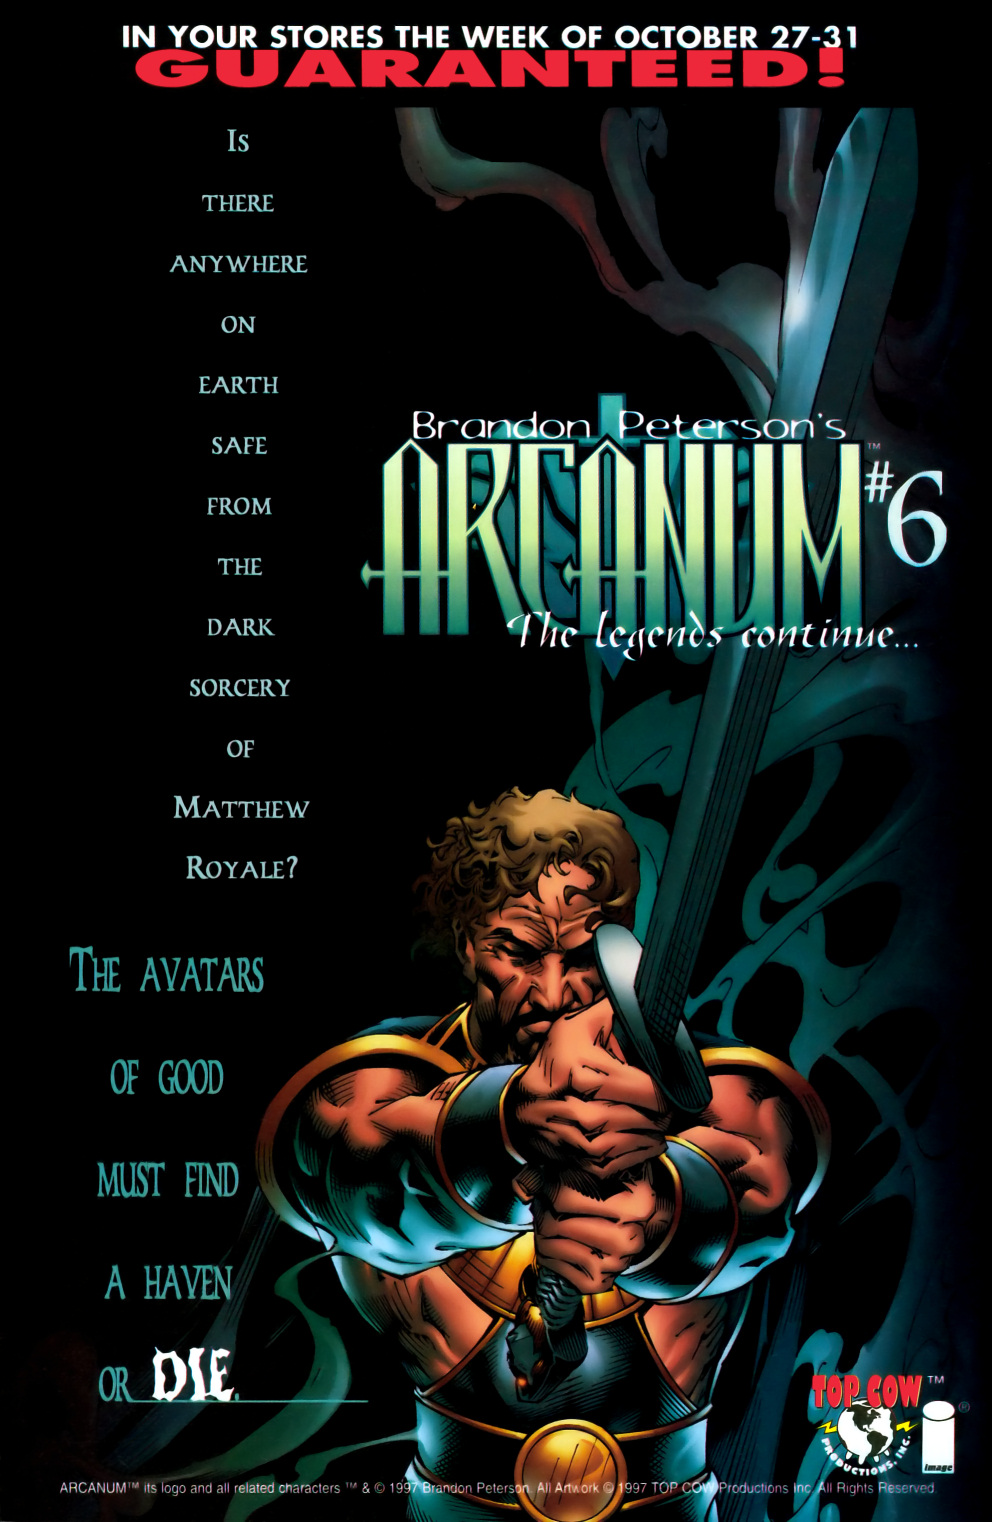 Ascension Issue 1 | Read Ascension Issue 1 comic online in high quality.  Read Full Comic online for free - Read comics online in high quality  .|viewcomiconline.com